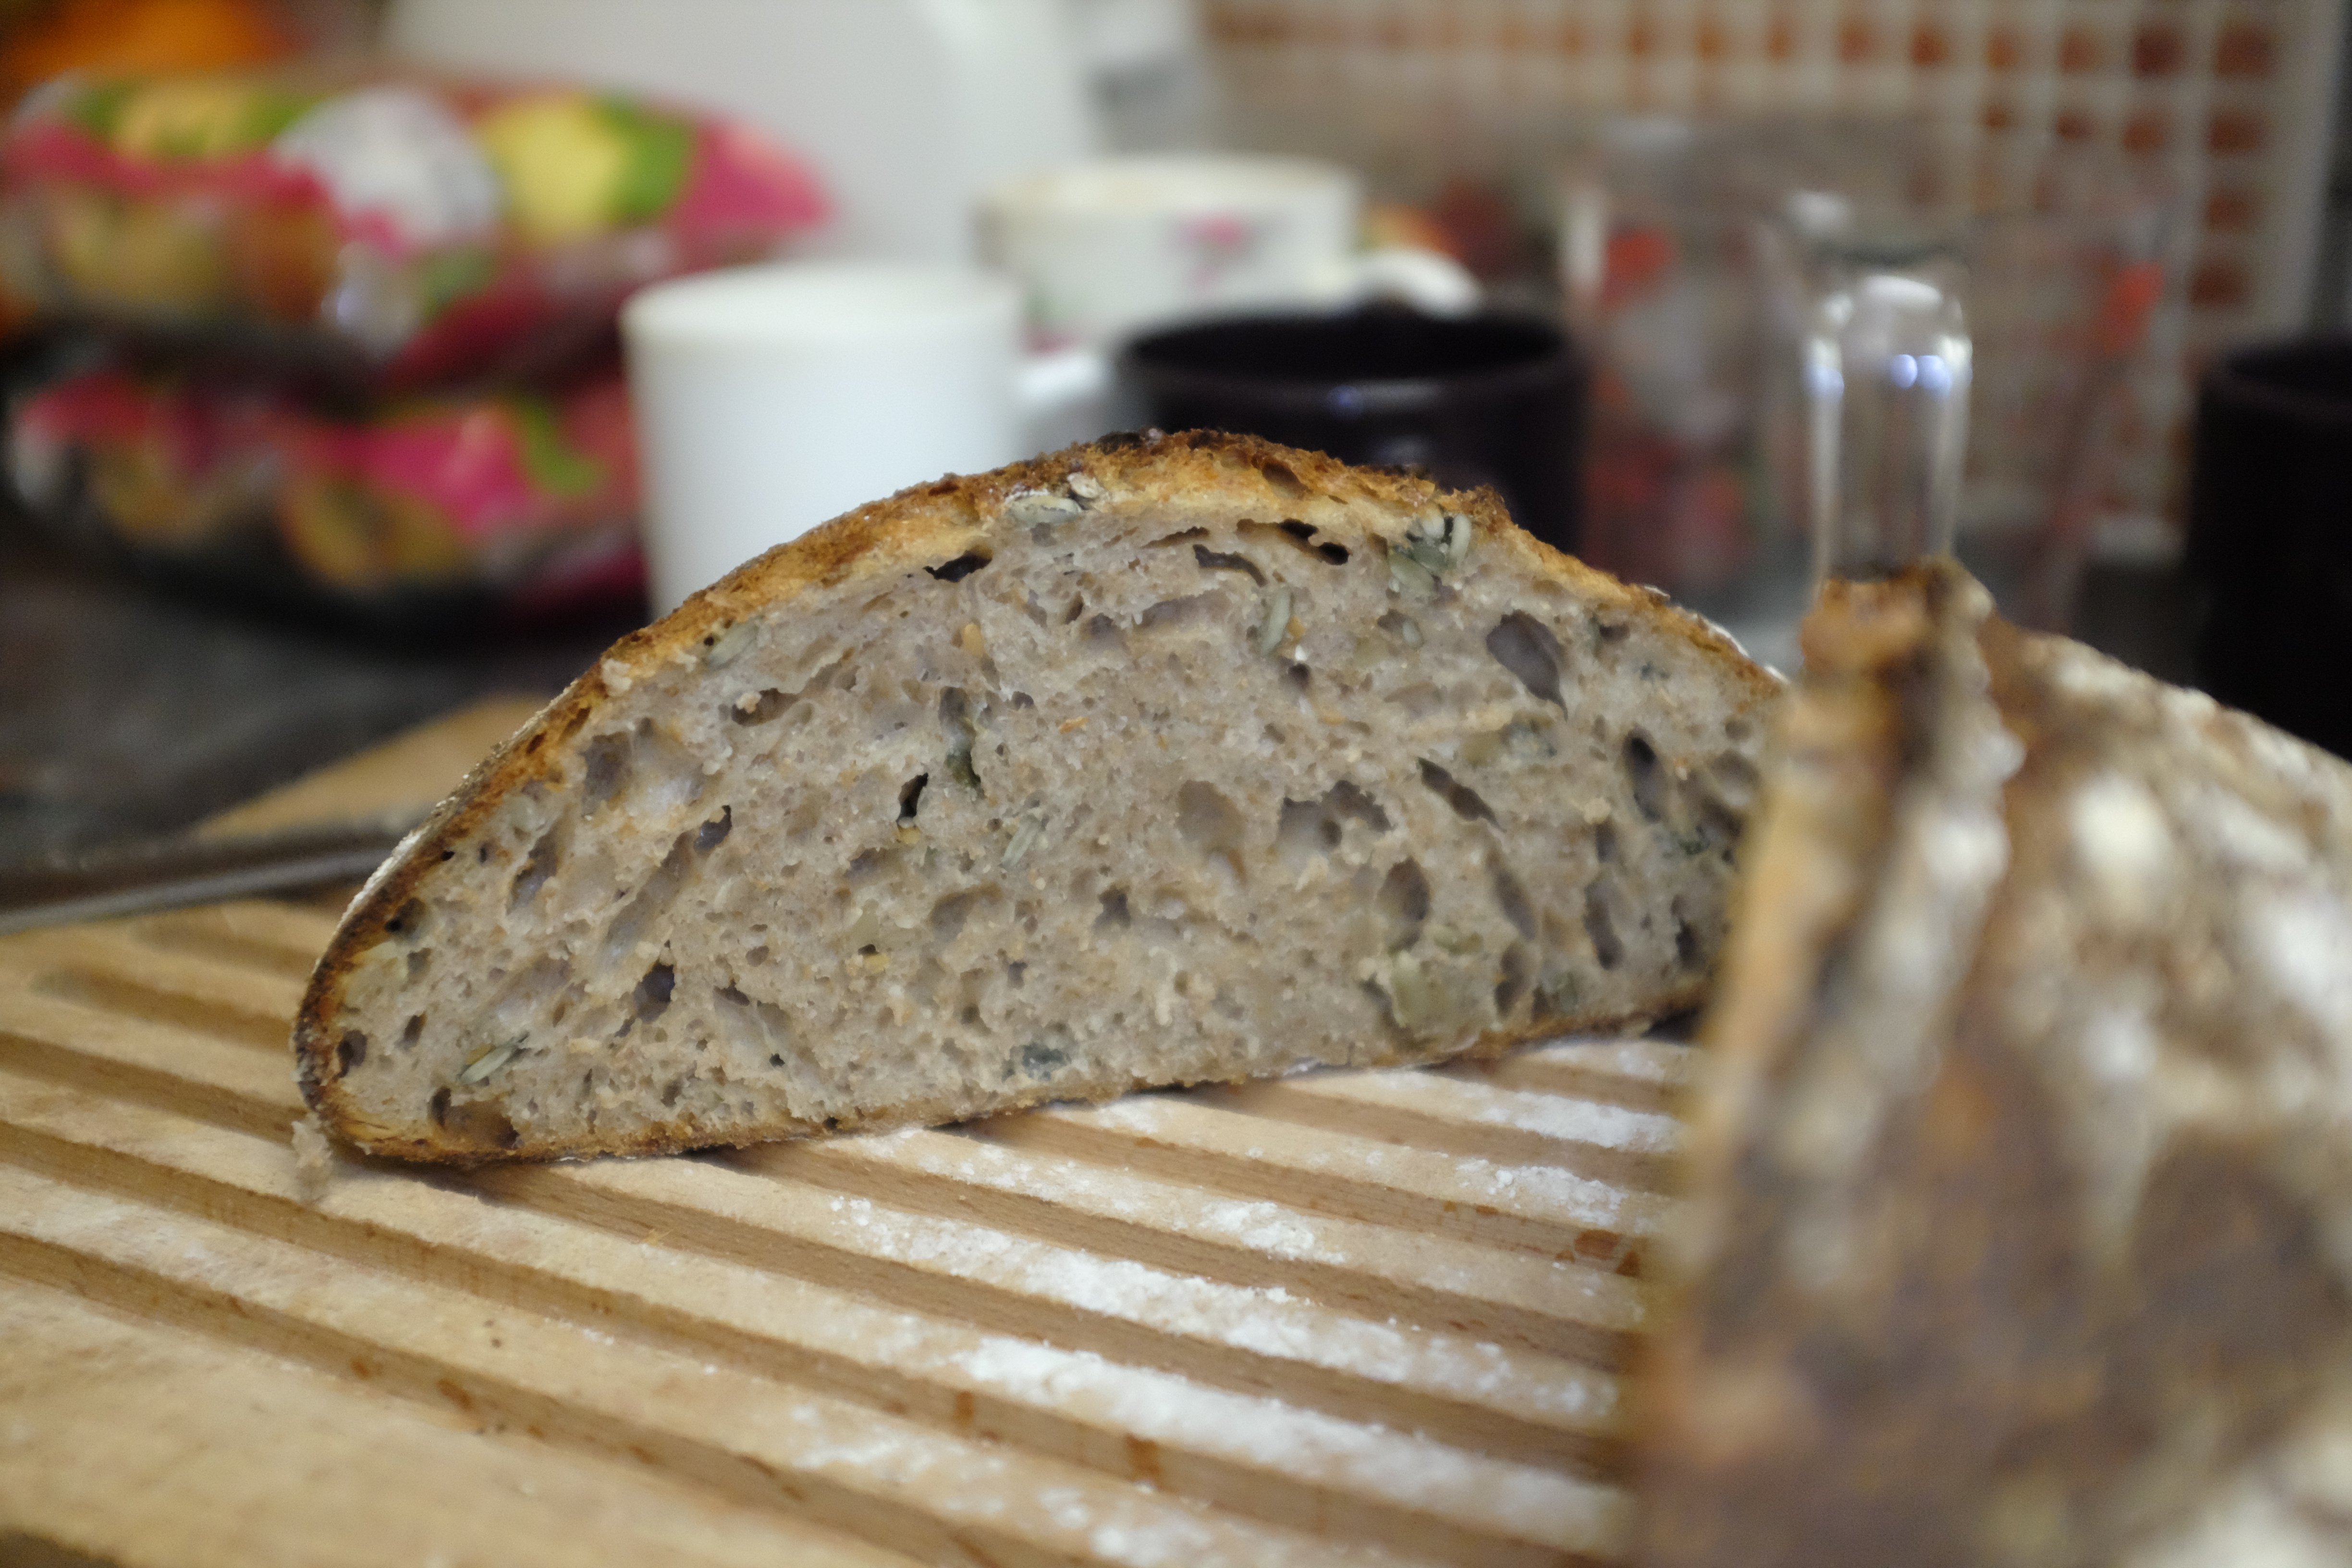 An image of a bread called “Seeded Wholemeal Sourdough”